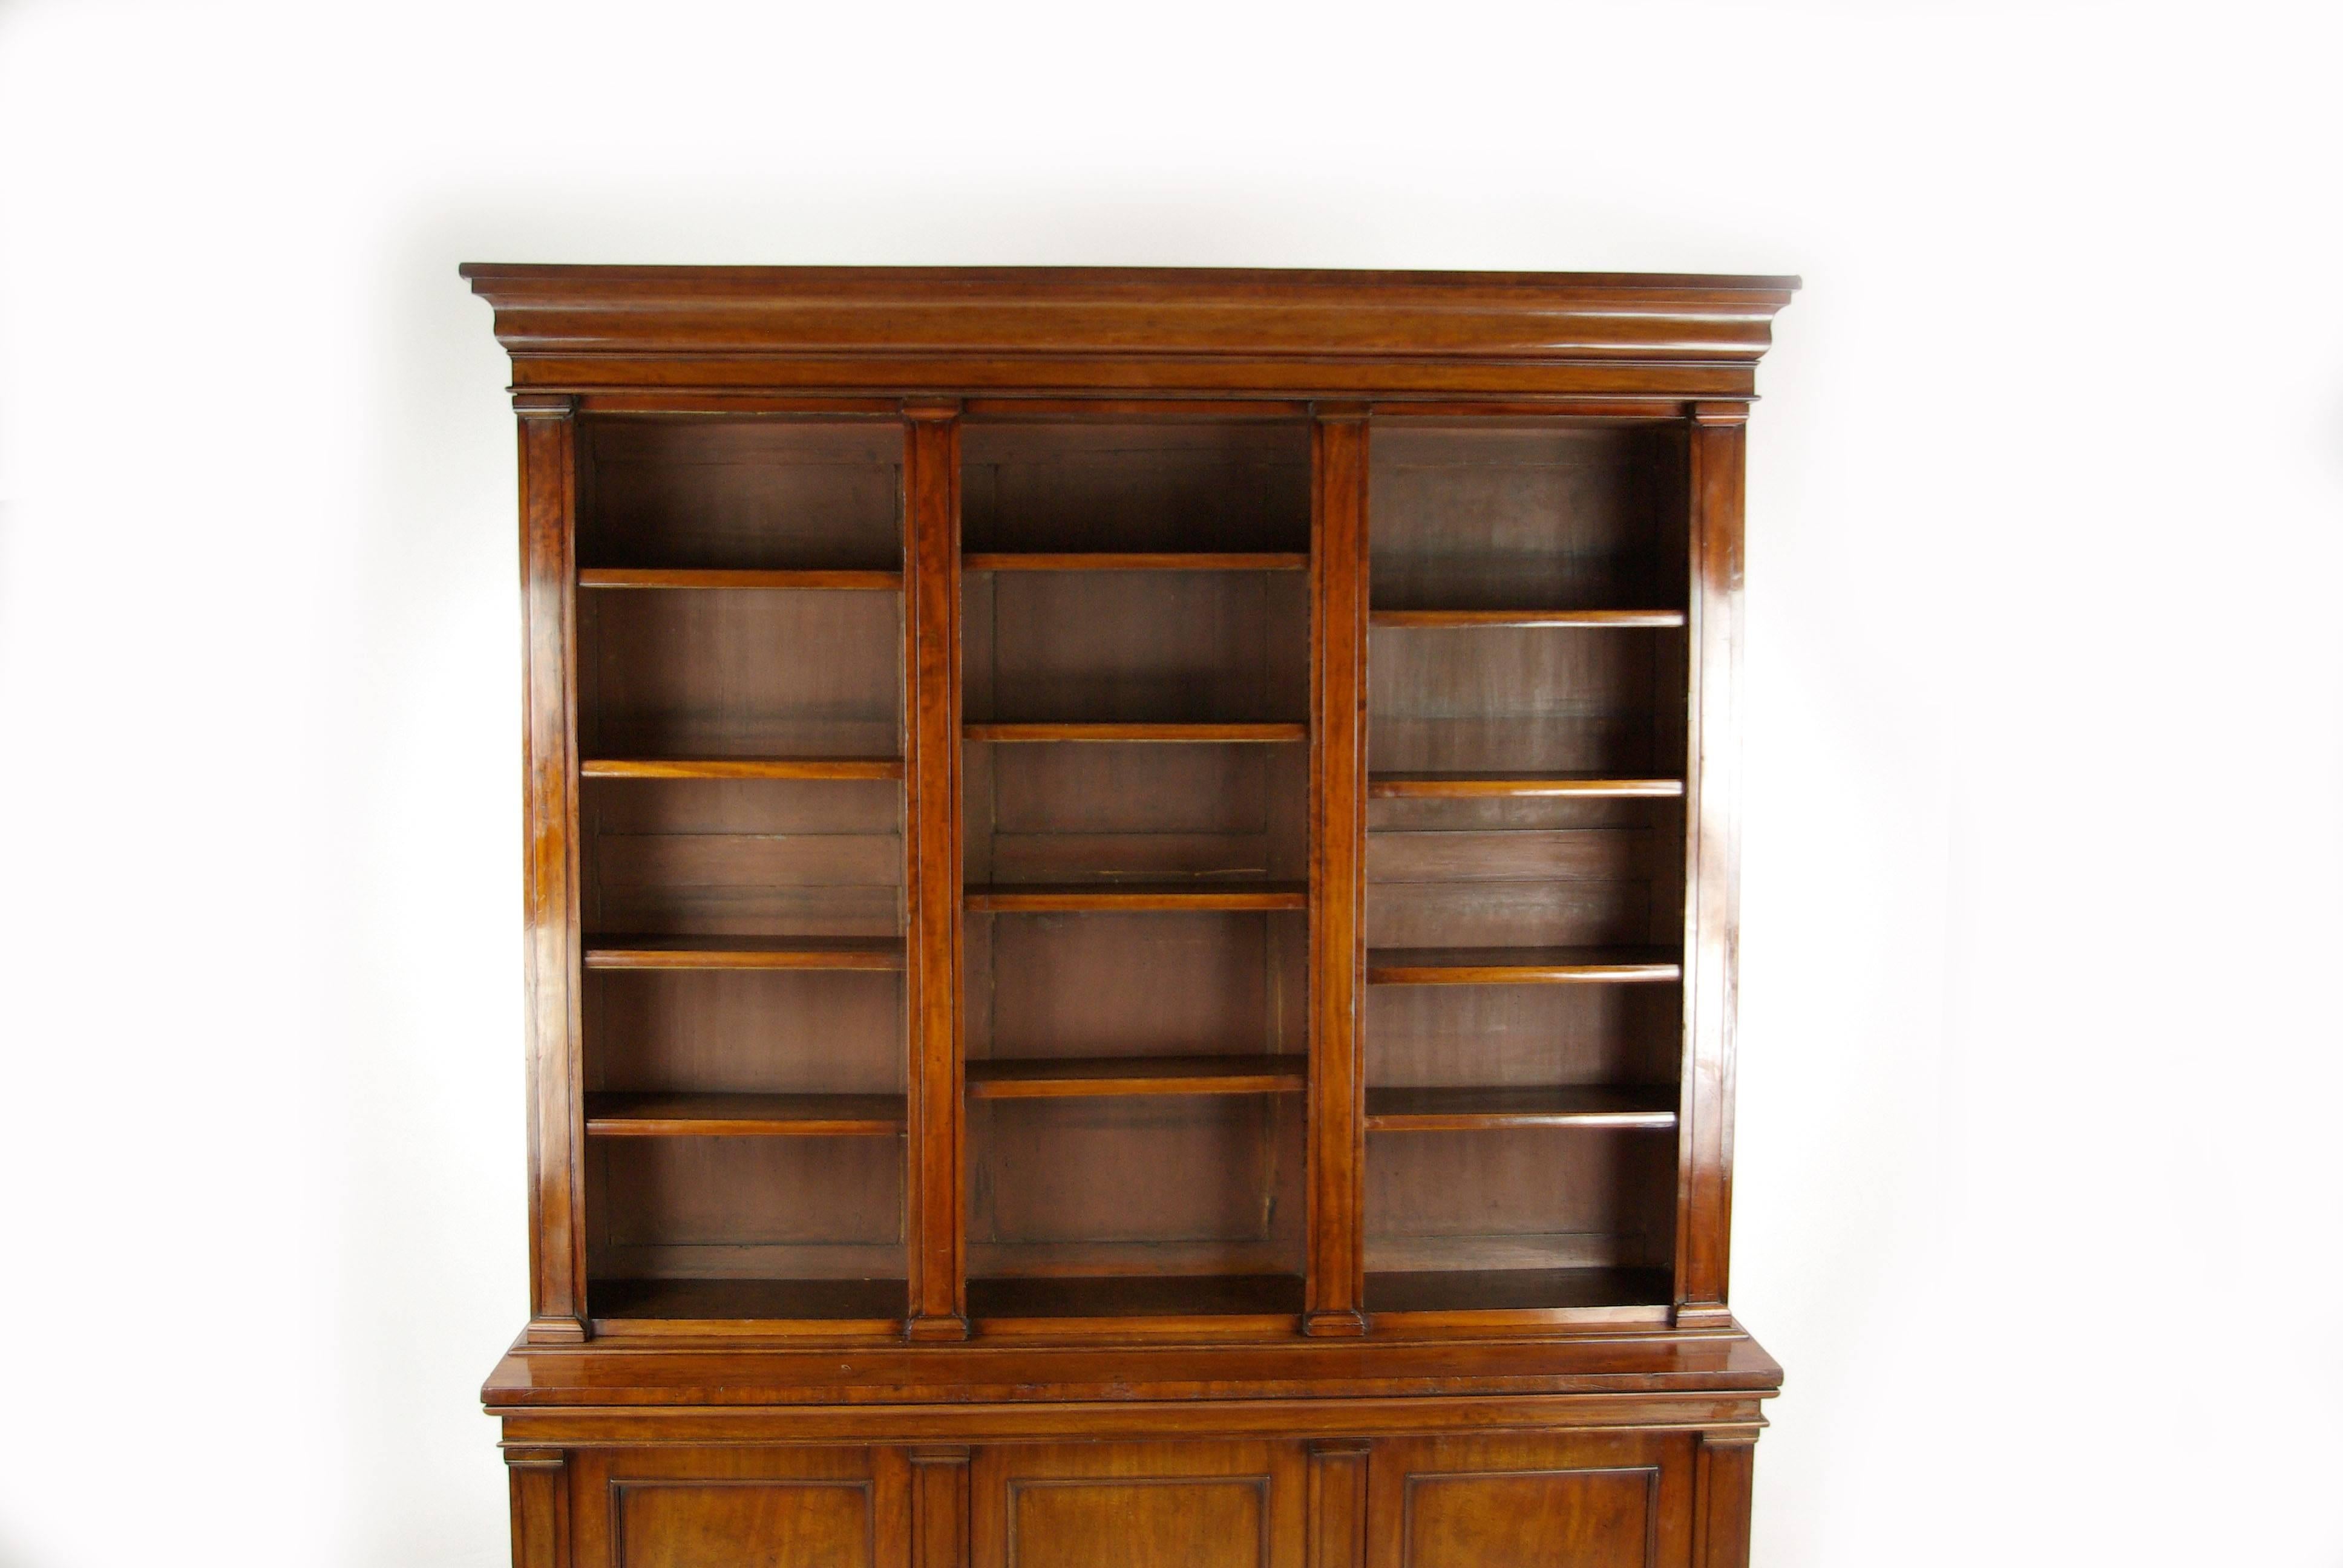 Scotland, 1860
Solid Walnut and veneers
Simple stylish cornice above
Three open sections with 12 adjustable mahogany shelves
Beneath top section are three paneled doors with interior shelves behind
Standing on an enclosed plinth base
Lovely quality